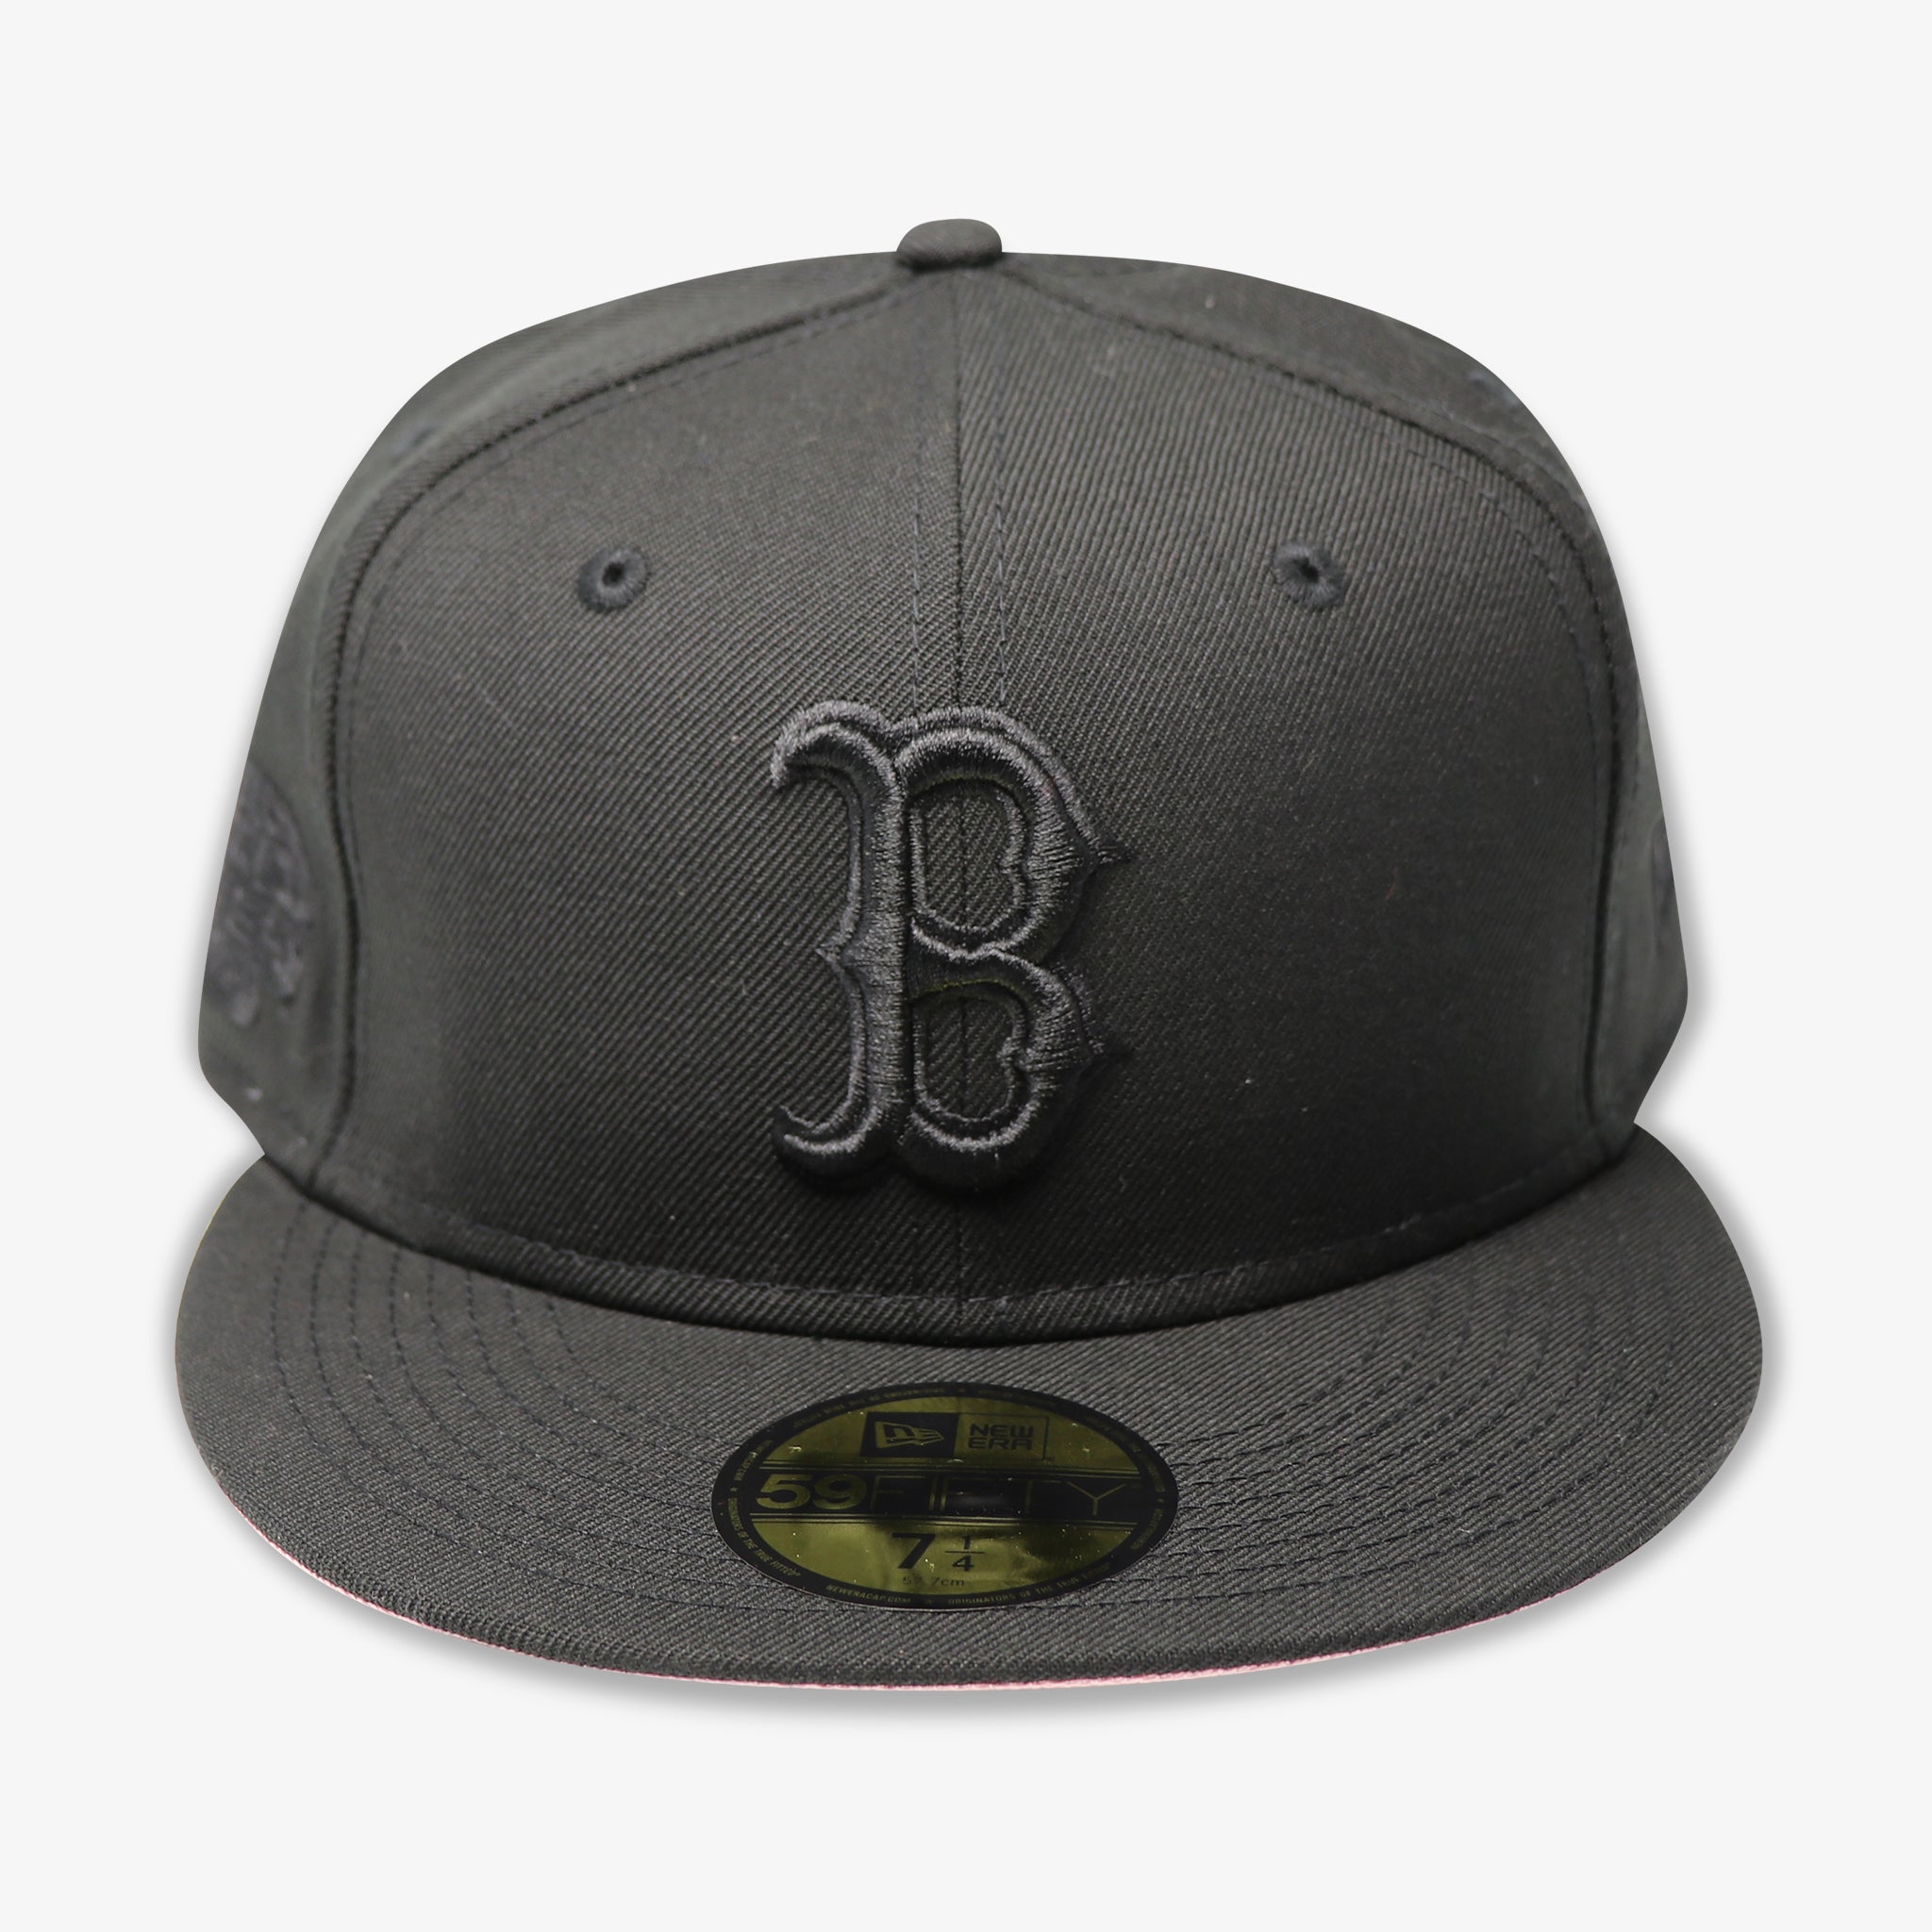 BOSTON REDSOX (2004 WS "BLACKOUT SERIES") NEW ERA 59FIFTY FITTED (PINK BOTTOM)